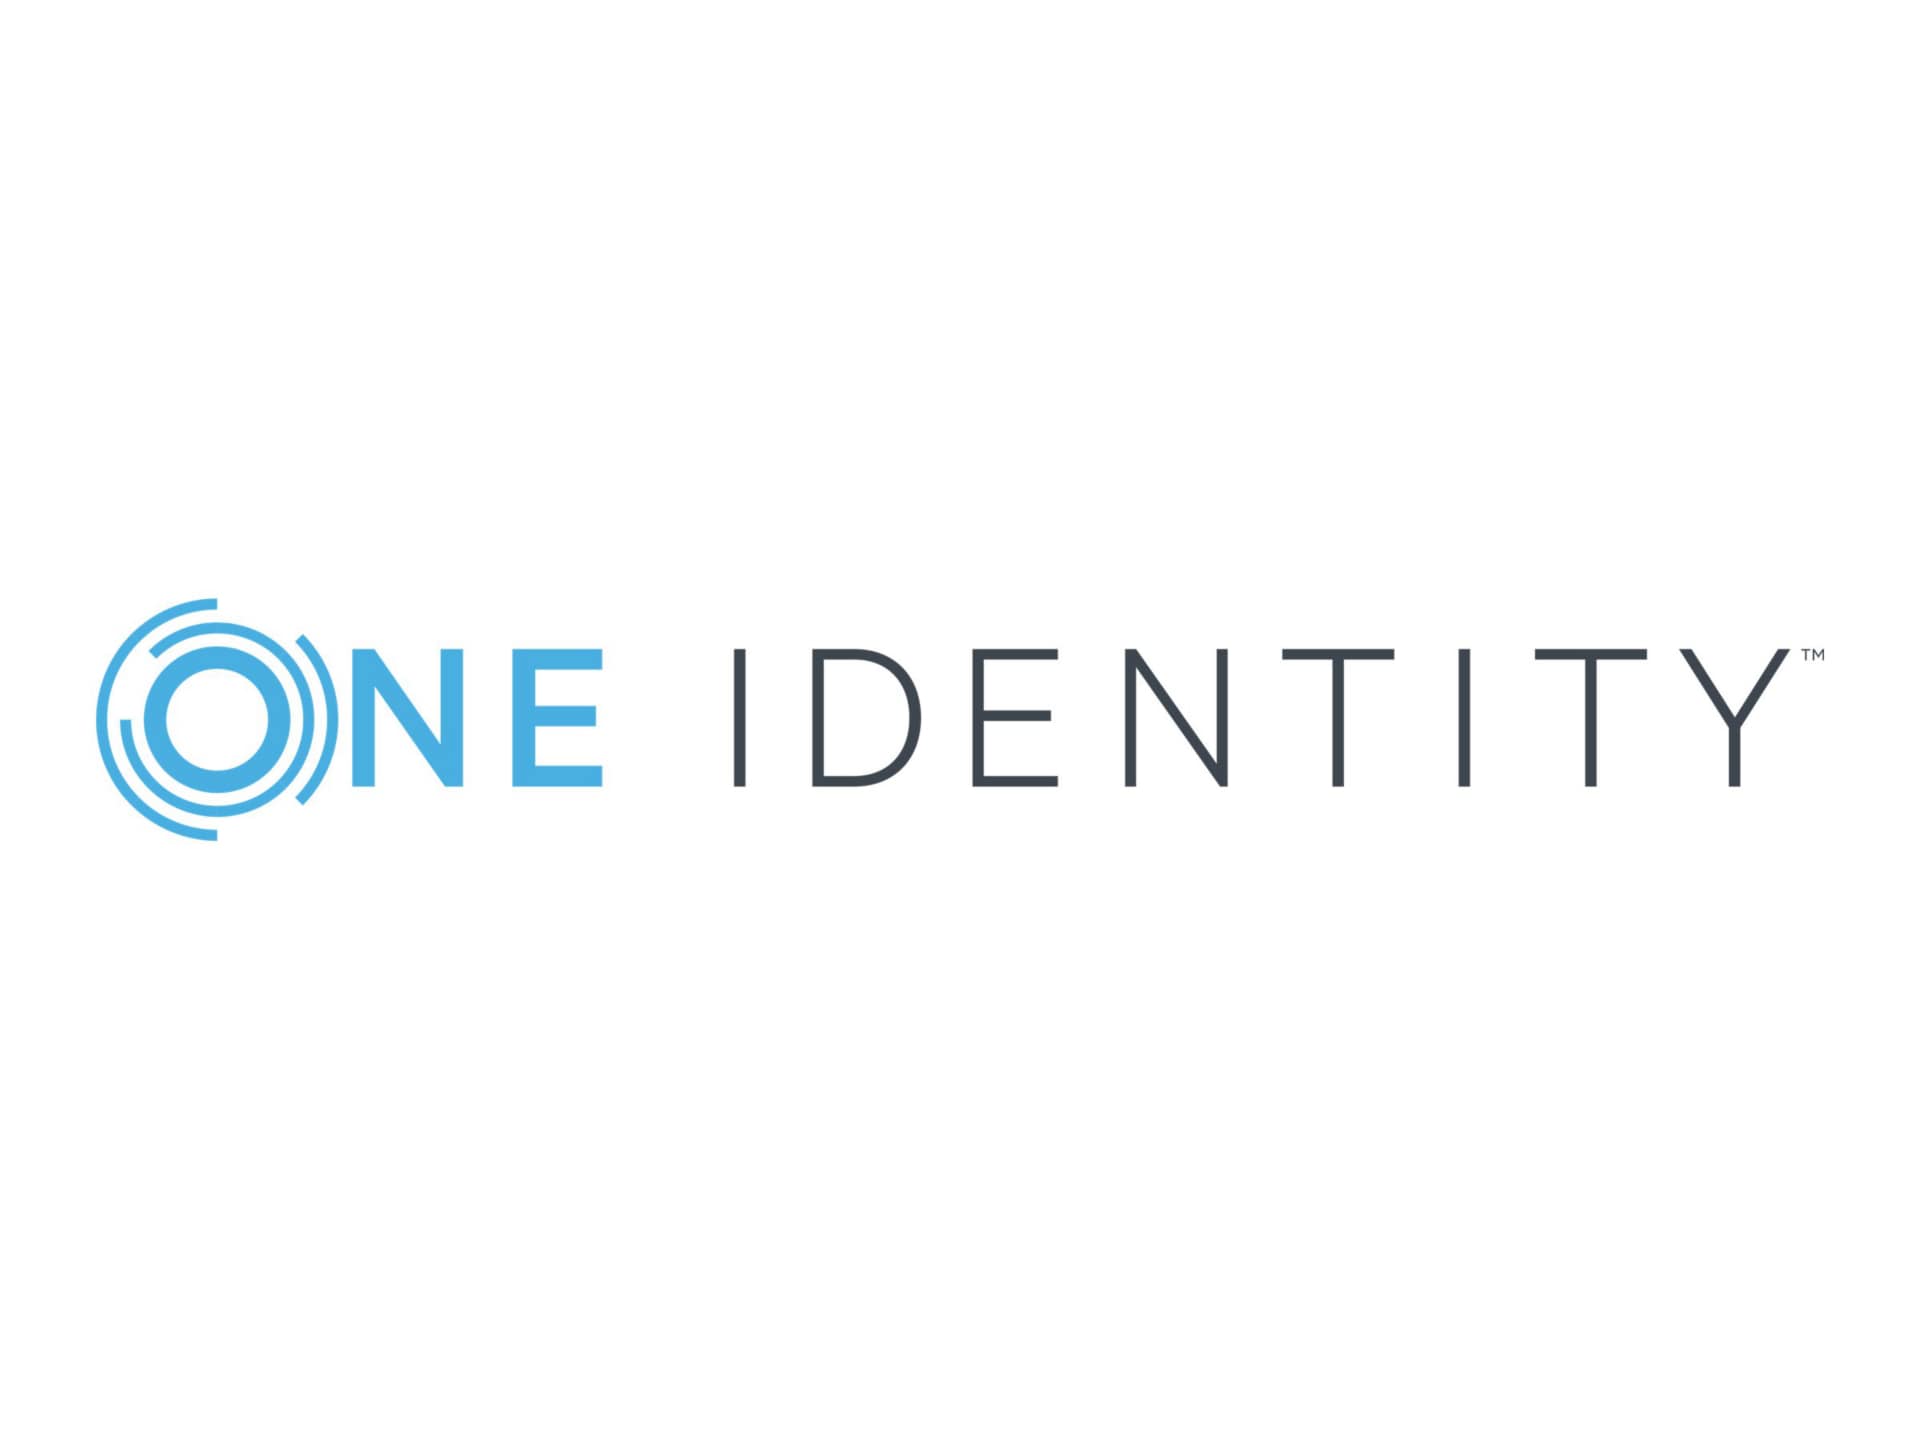 Quest One Identity Safeguard Privileged Security Bundle - license + 1 Year 24x7 Maintenance - 1 IDM user